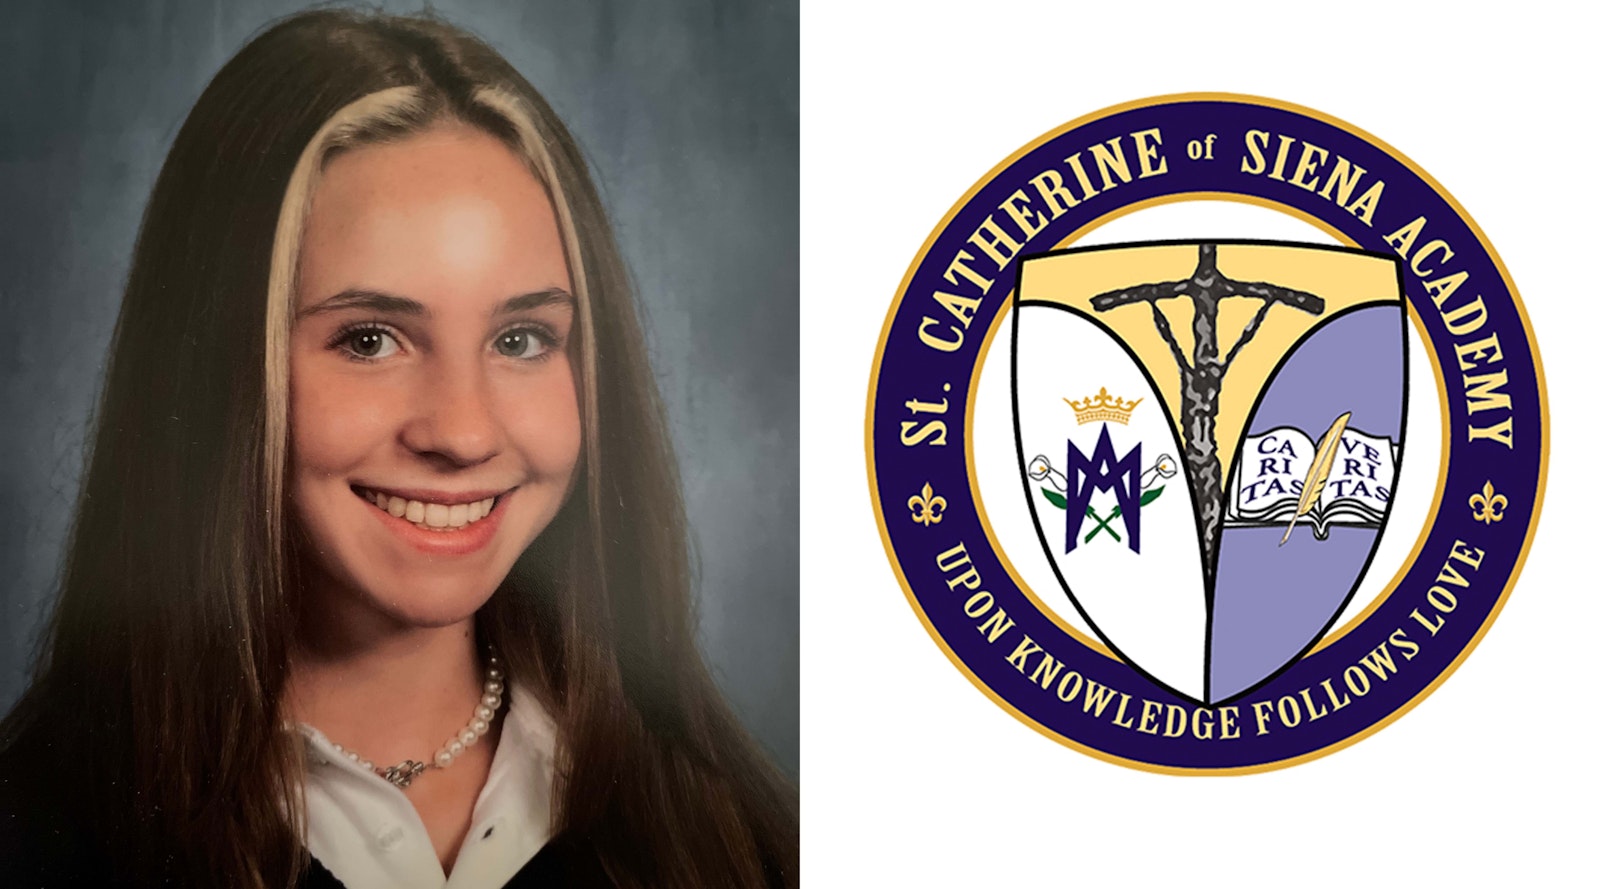 Emma Robinson, a freshman at St. Catherine of Sienna Academy in Wixom, is the second person in her family to win the 'Live It. Show It. Share It." Scholarship after her sister, Isabella, won the grand prize last year. (Photo courtesy of Emma Robinson)